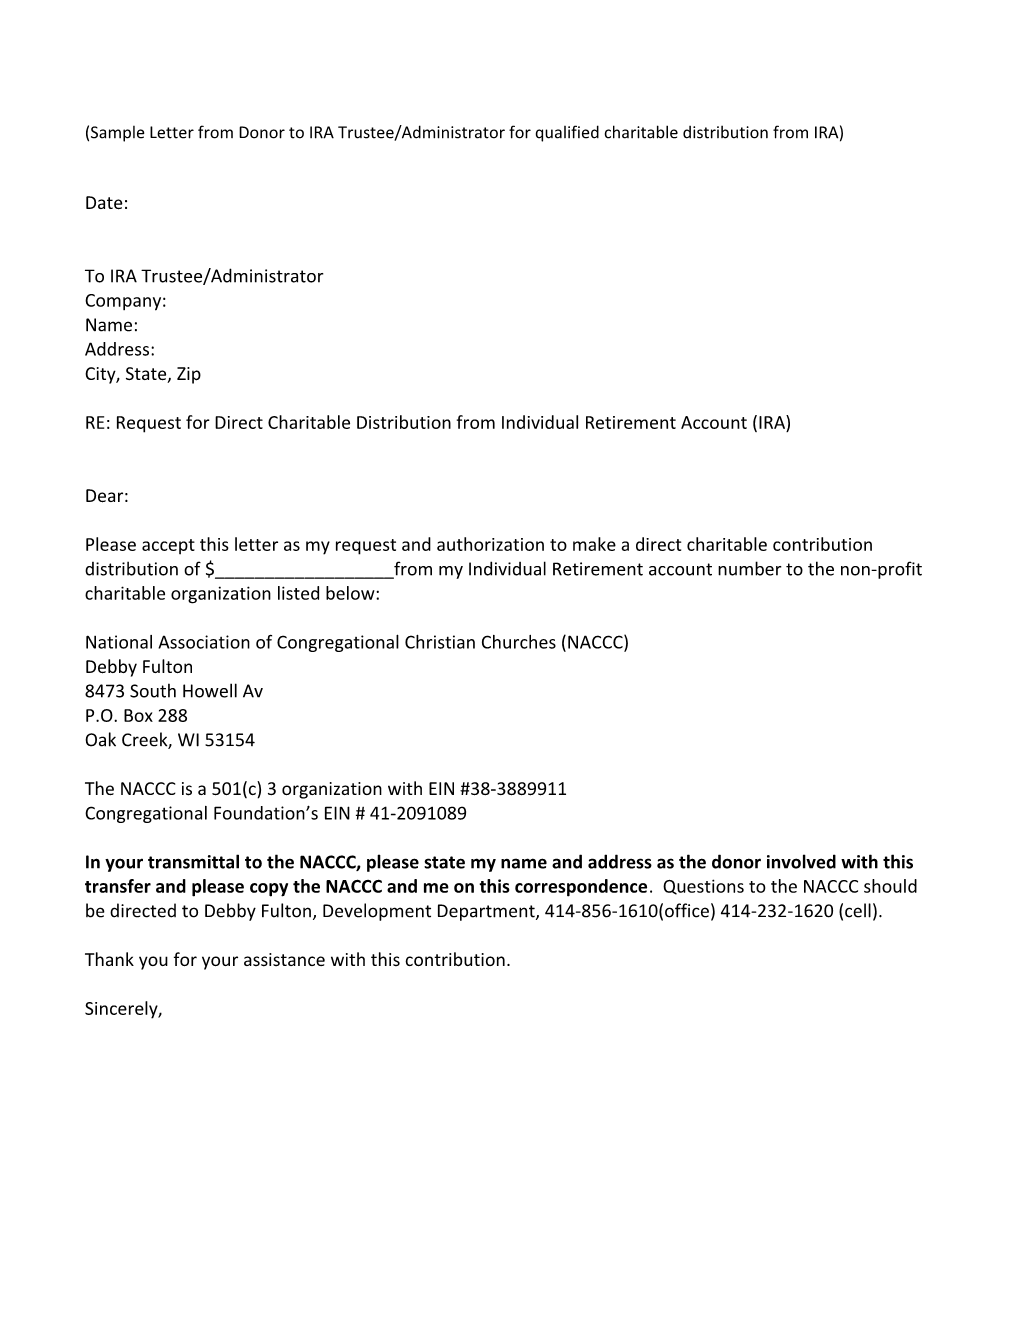 (Sample Letter from Donor to IRA Trustee/Administrator for Qualified Charitable Distribution